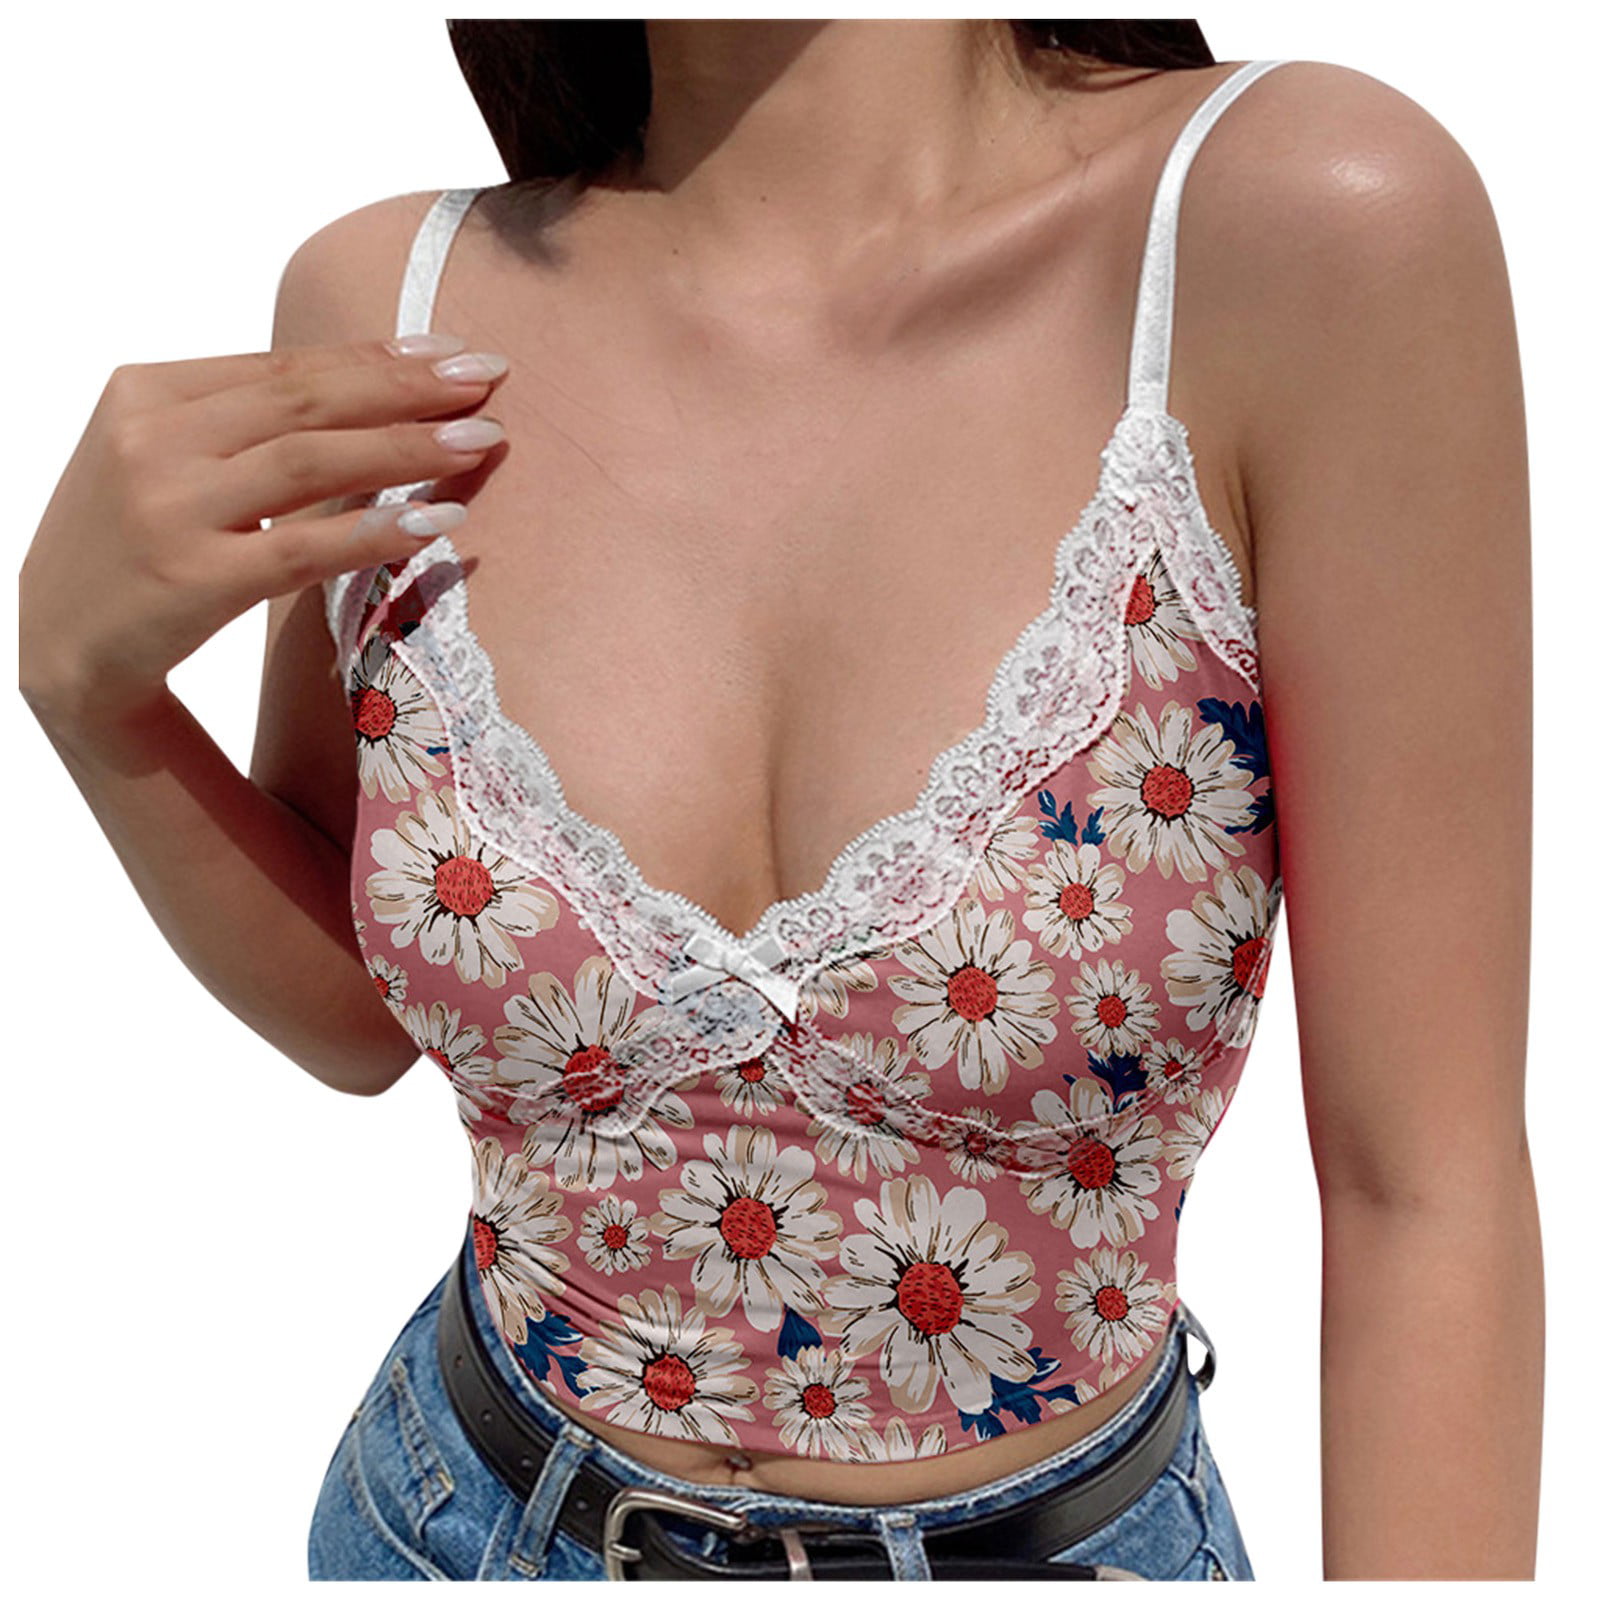 TOYFUNNY Womens 2019 Large Size Solid Color Lace Sleeveless Vest Top Two Styles Manufacturer Price 